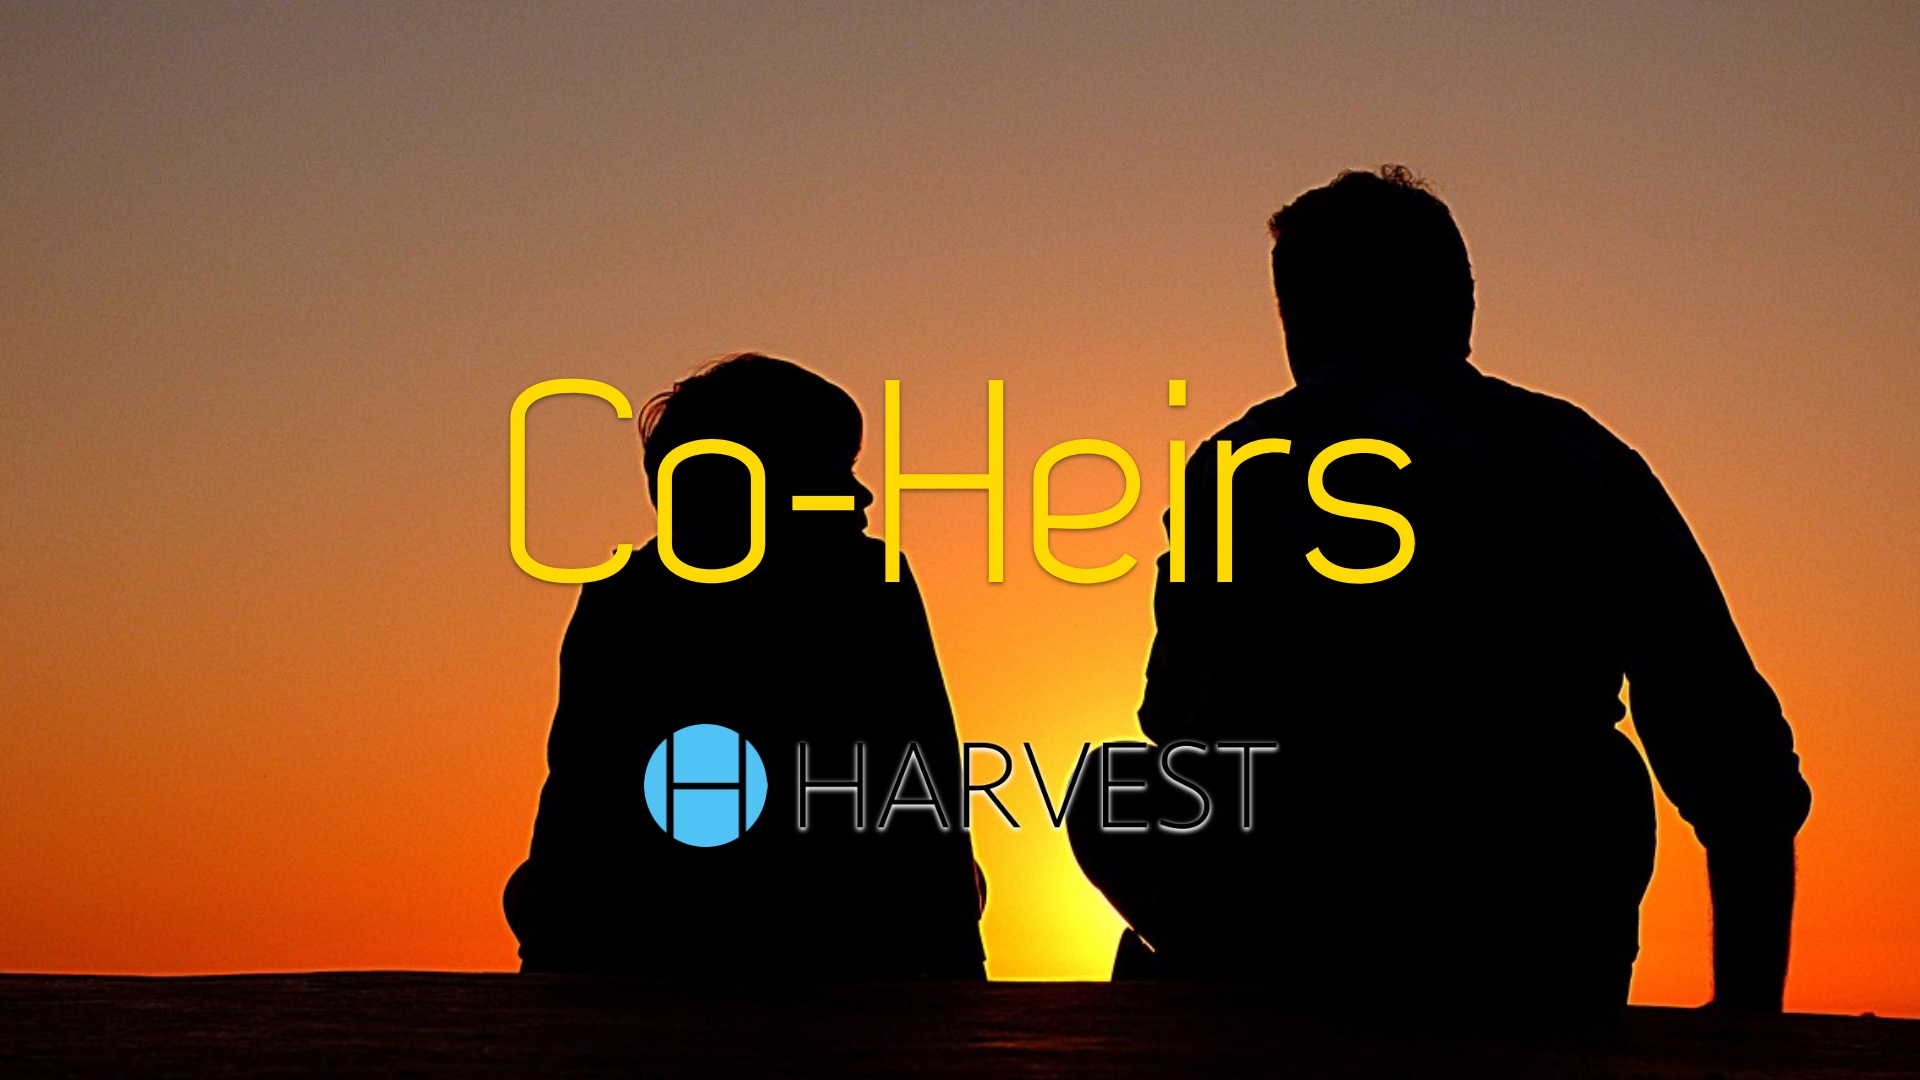 Co-Heirs